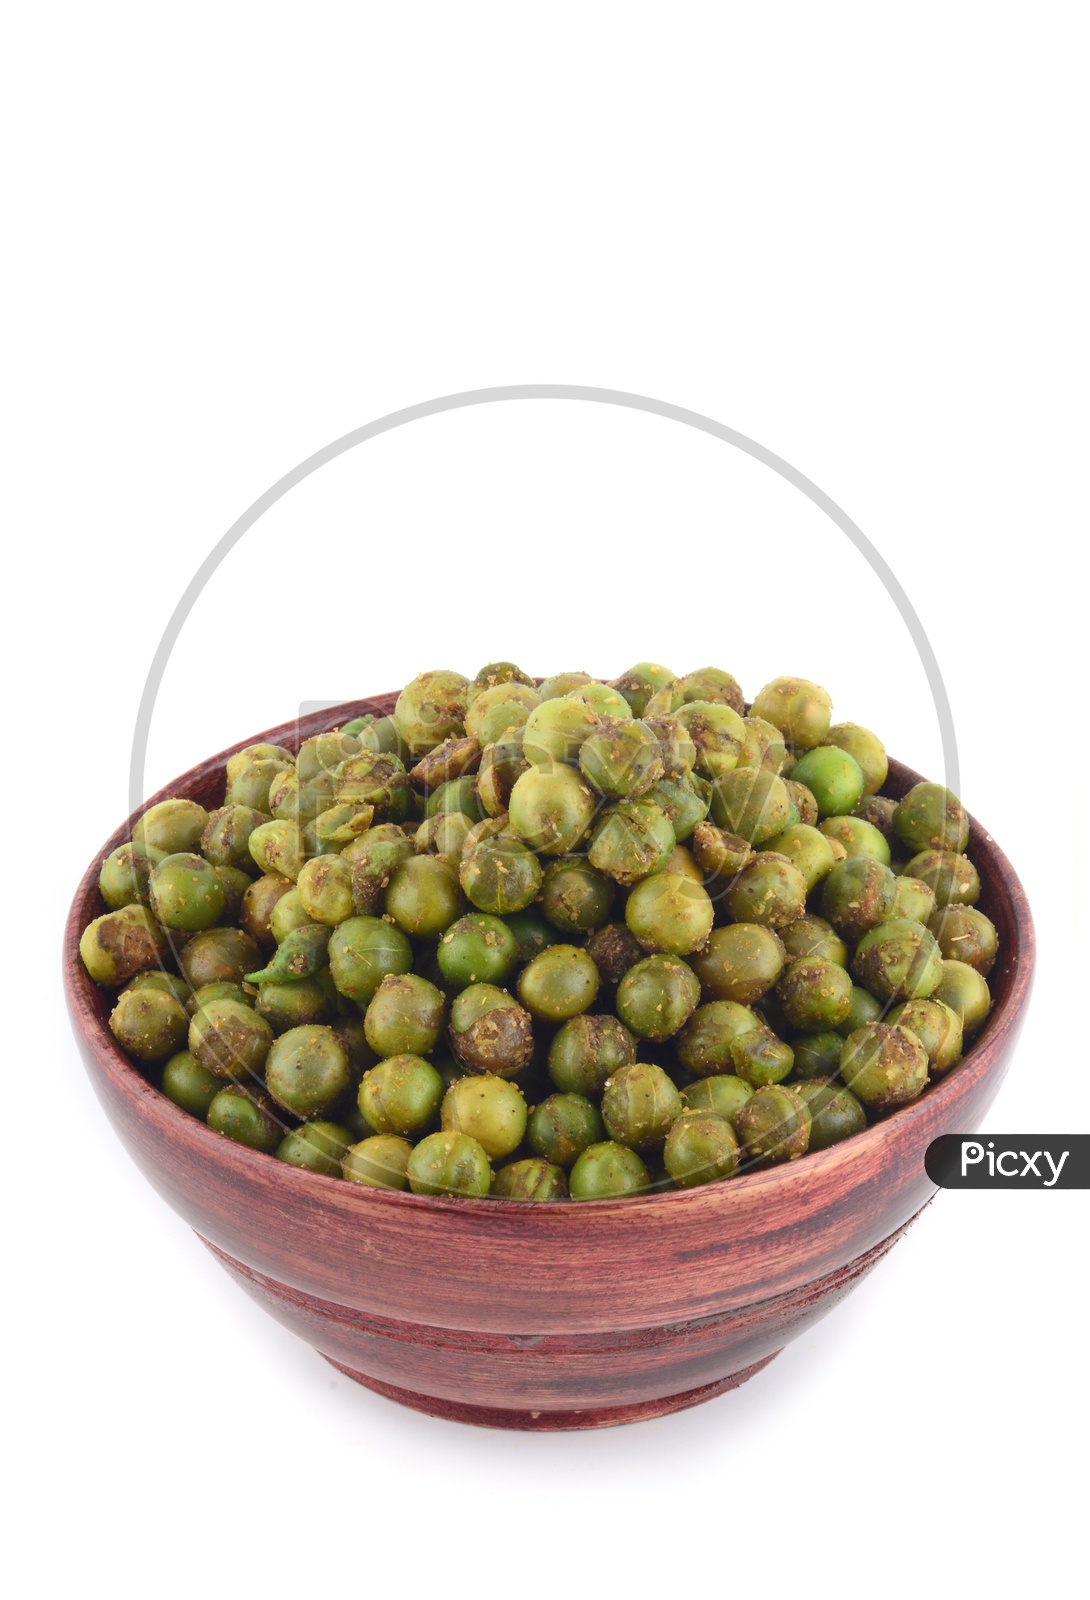 Indian Salty Deep Fried Green Peas  In a Wooden Bowl On an Isolated White Background